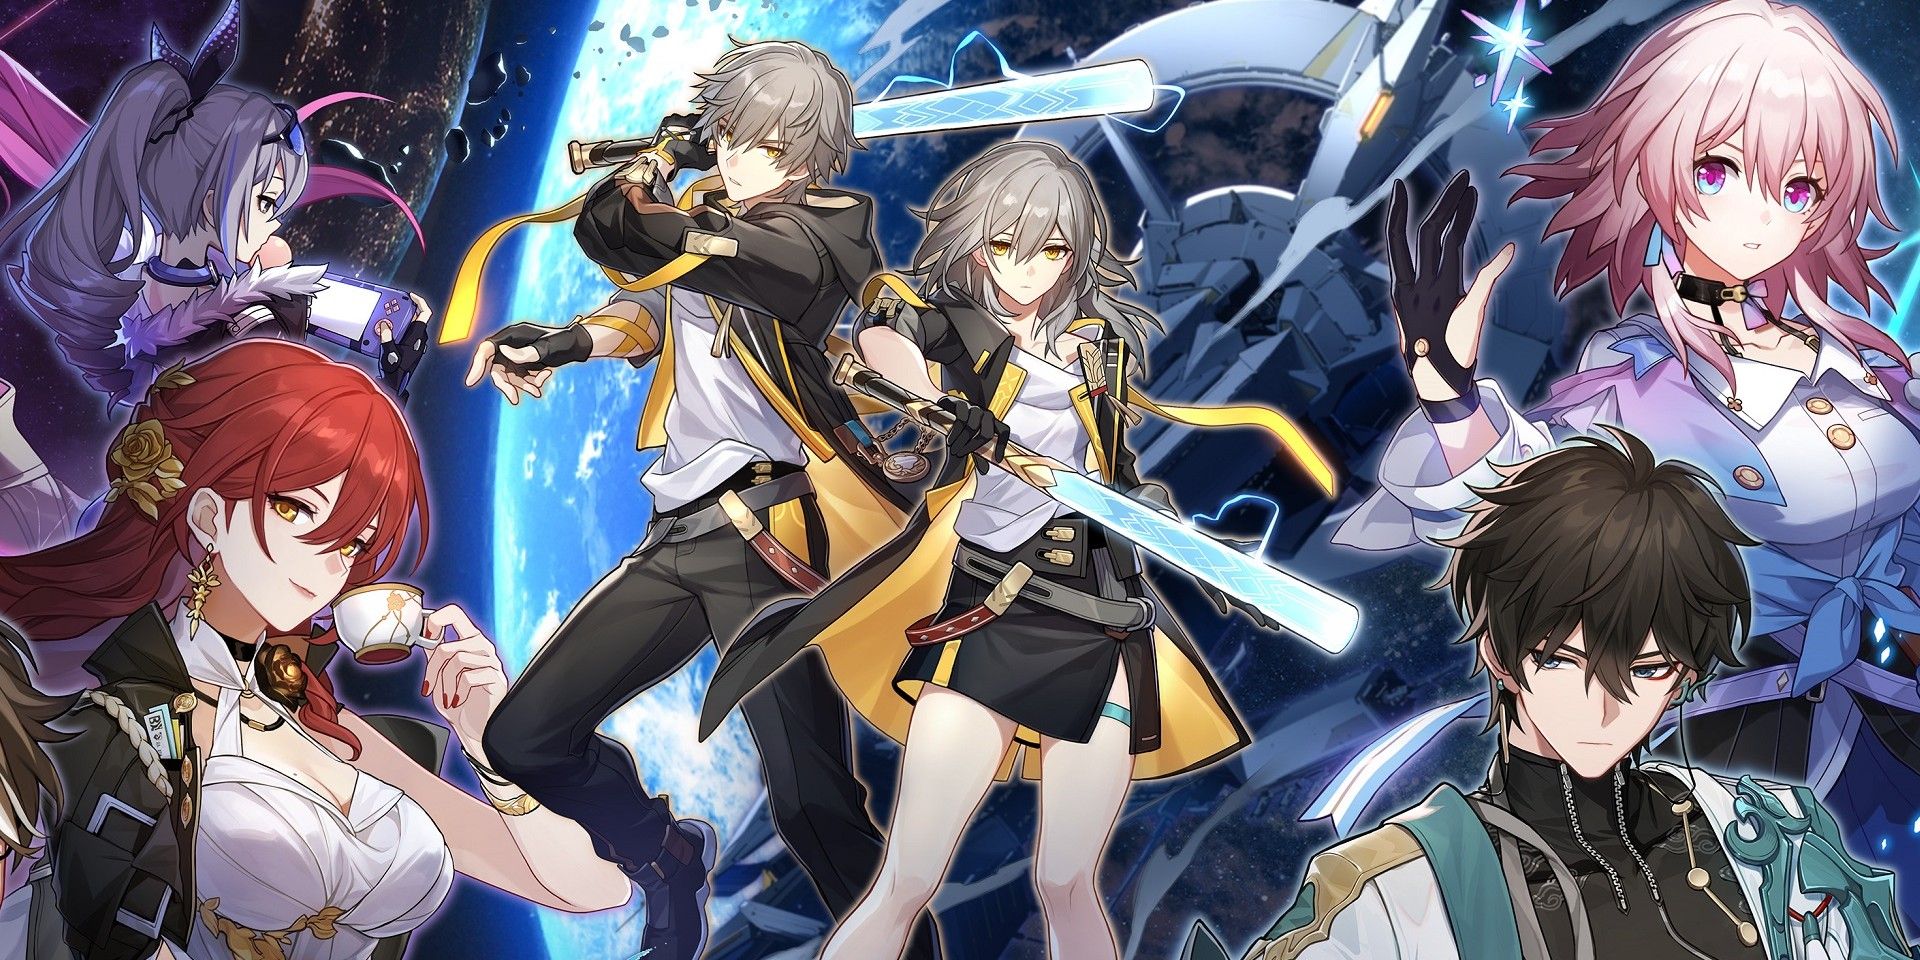 Honkai Star Rail's main splash art, showing many of the game's playable characters, with the Trailblazer twins posing in the middle.